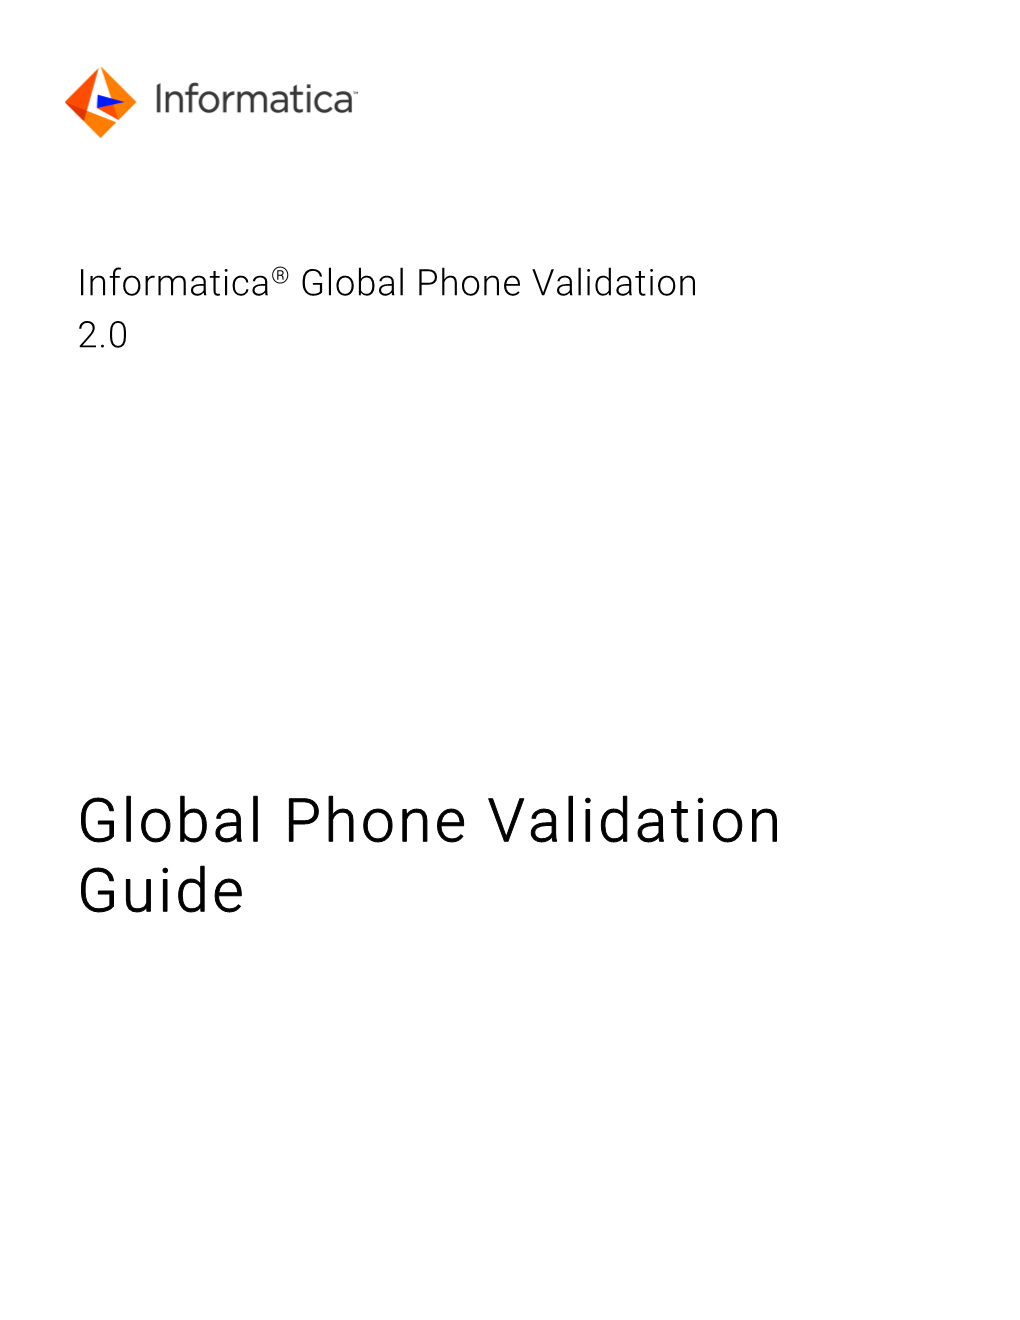 Global Phone Validation Guide